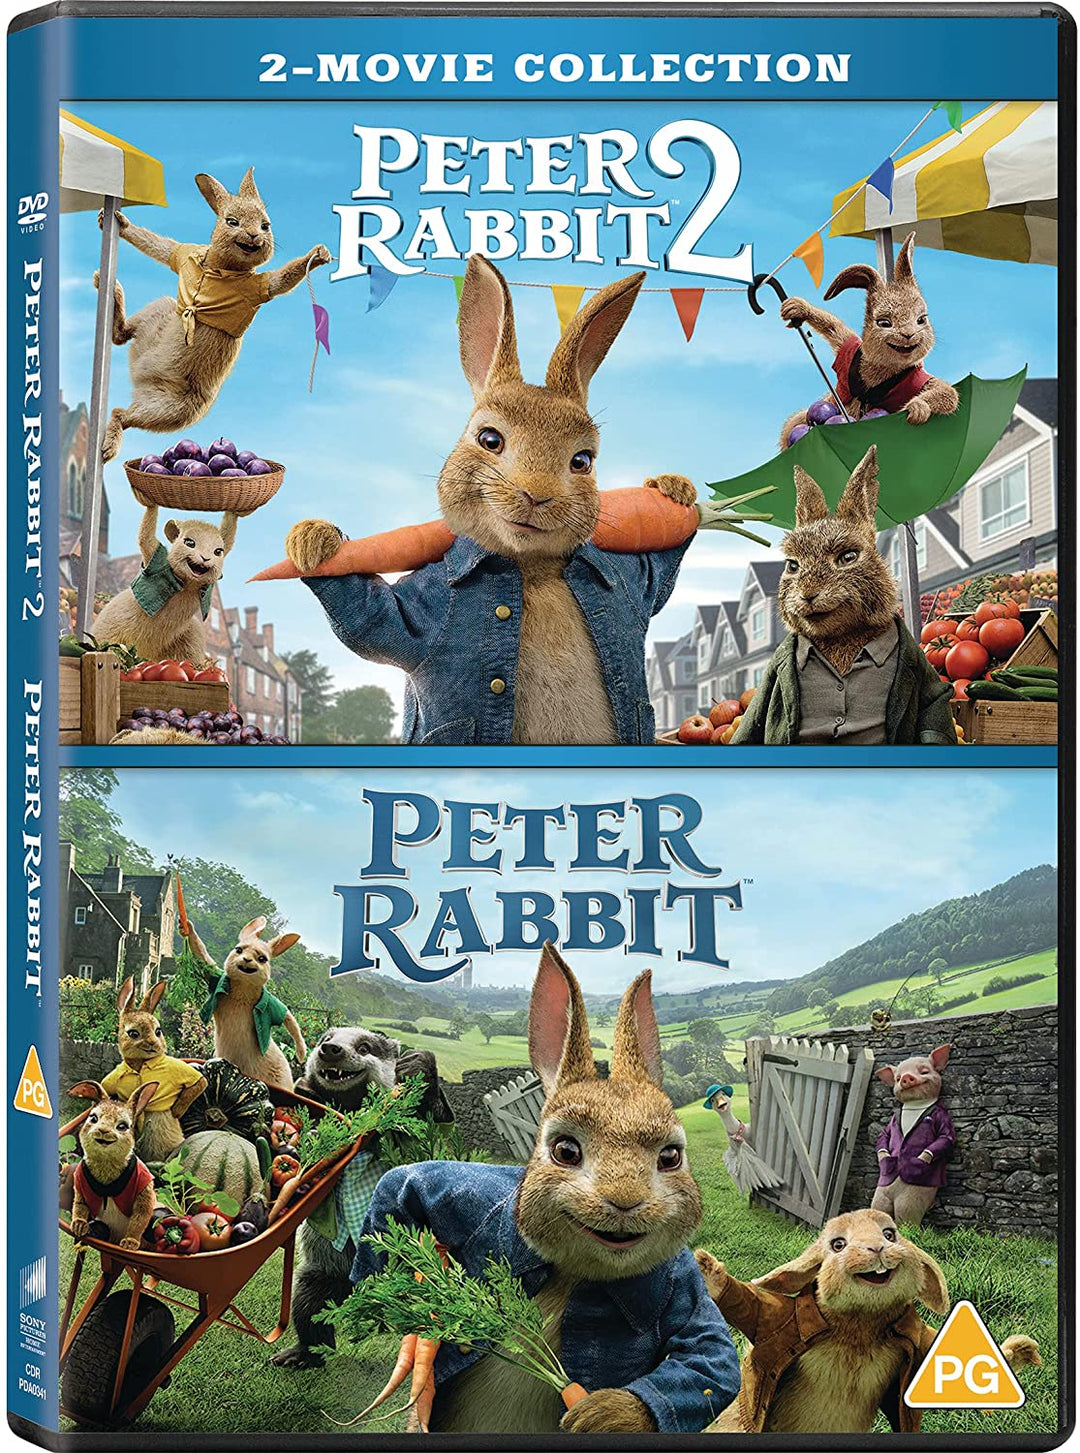 Peter Rabbit 1 and 2 (2 Disc DVD) - Family/Comedy [DVD]